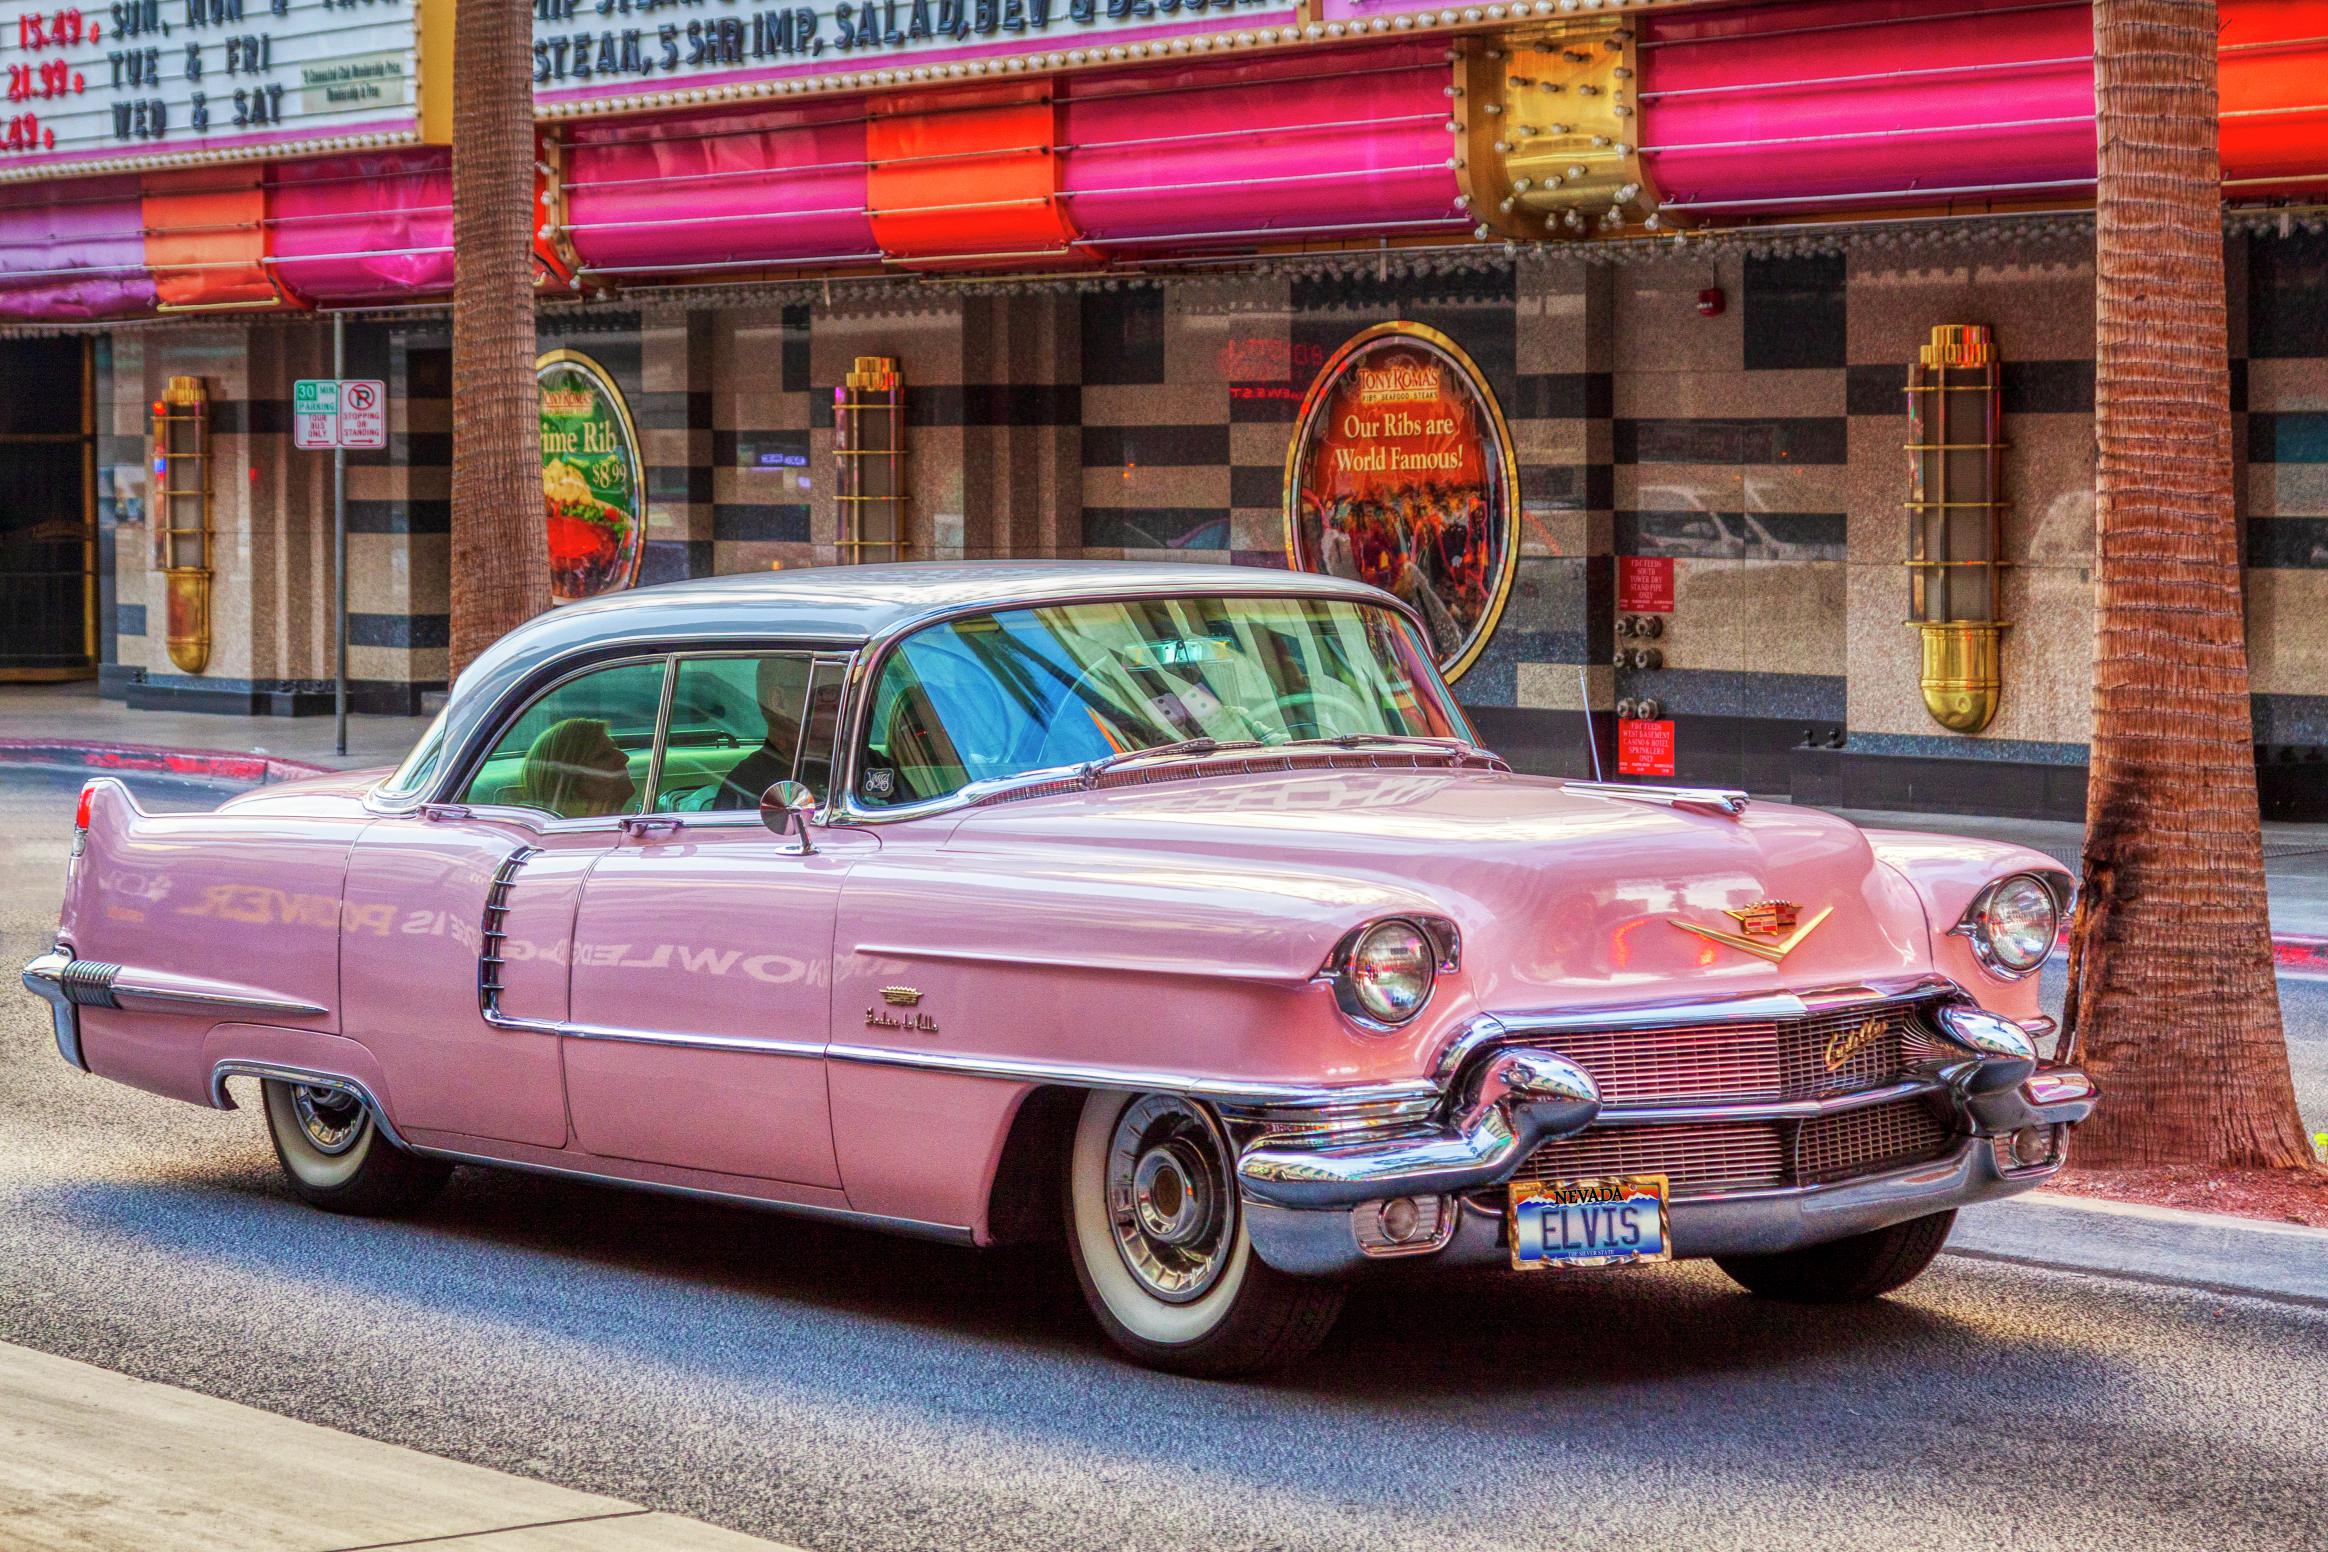 Elvis Pink Cadillac tour on Fremont Street Experience